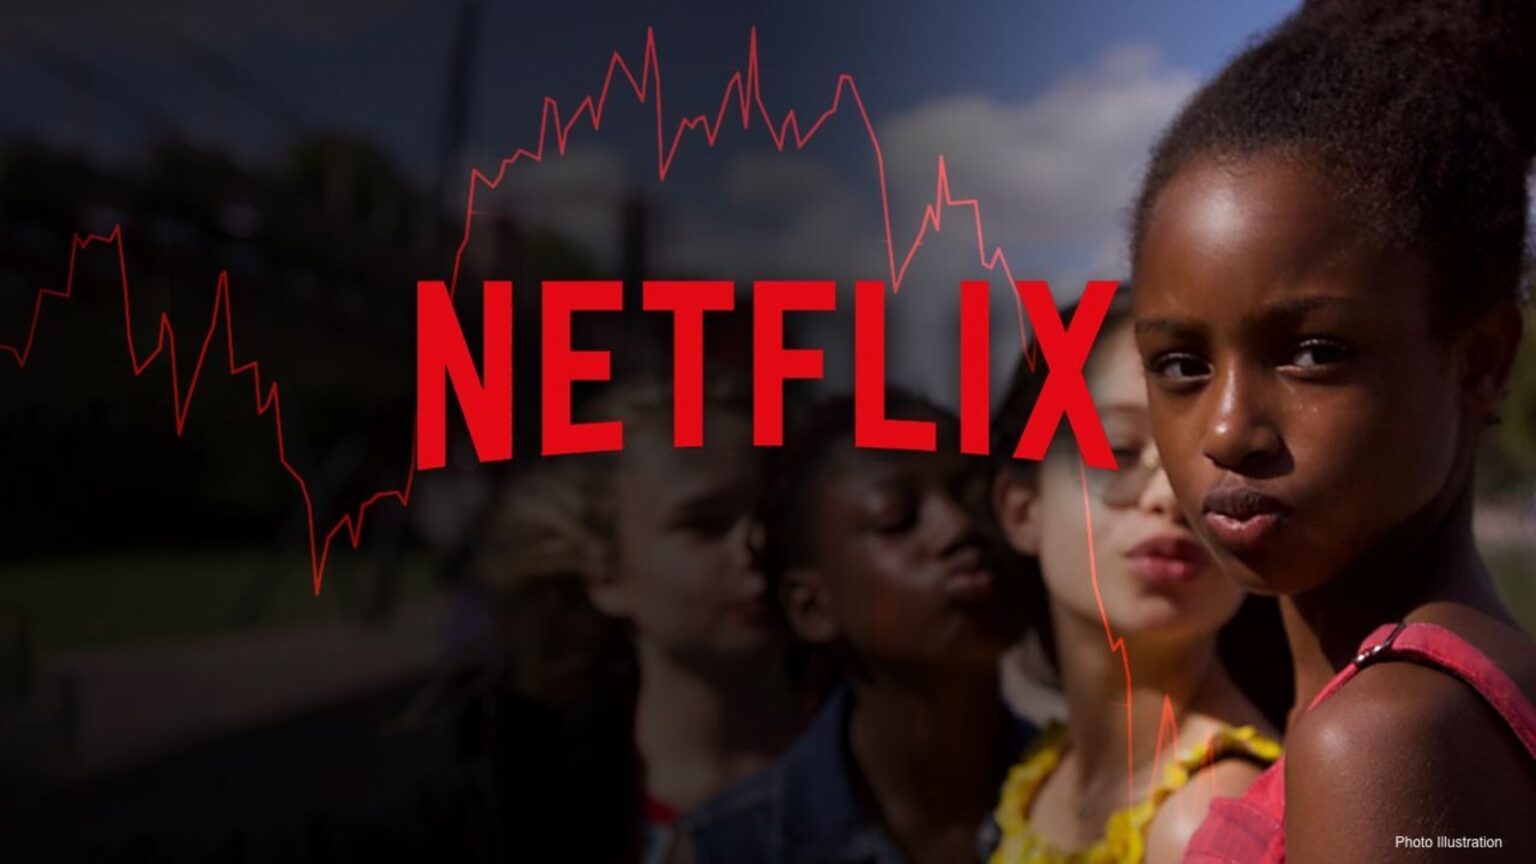 Why is Netflix being indicted for 'Cuties'? Here is the latest news on Netflix's legal problems over this controversial film.